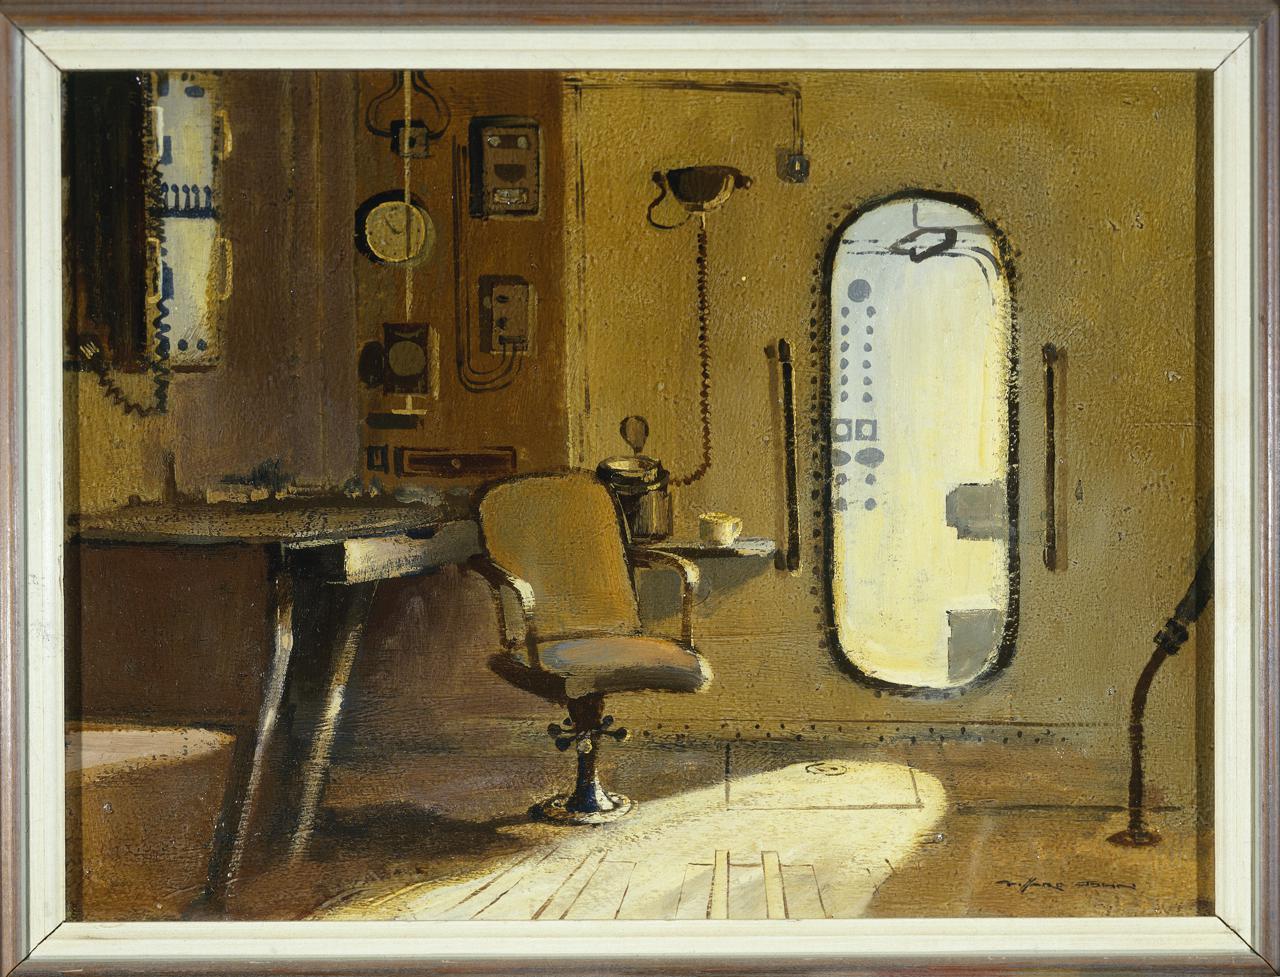 painting of a radio-operator or navigator's post in the Cromer lifeboat, with a shaft of light coming through the open bulkhead door from the neighbouring space